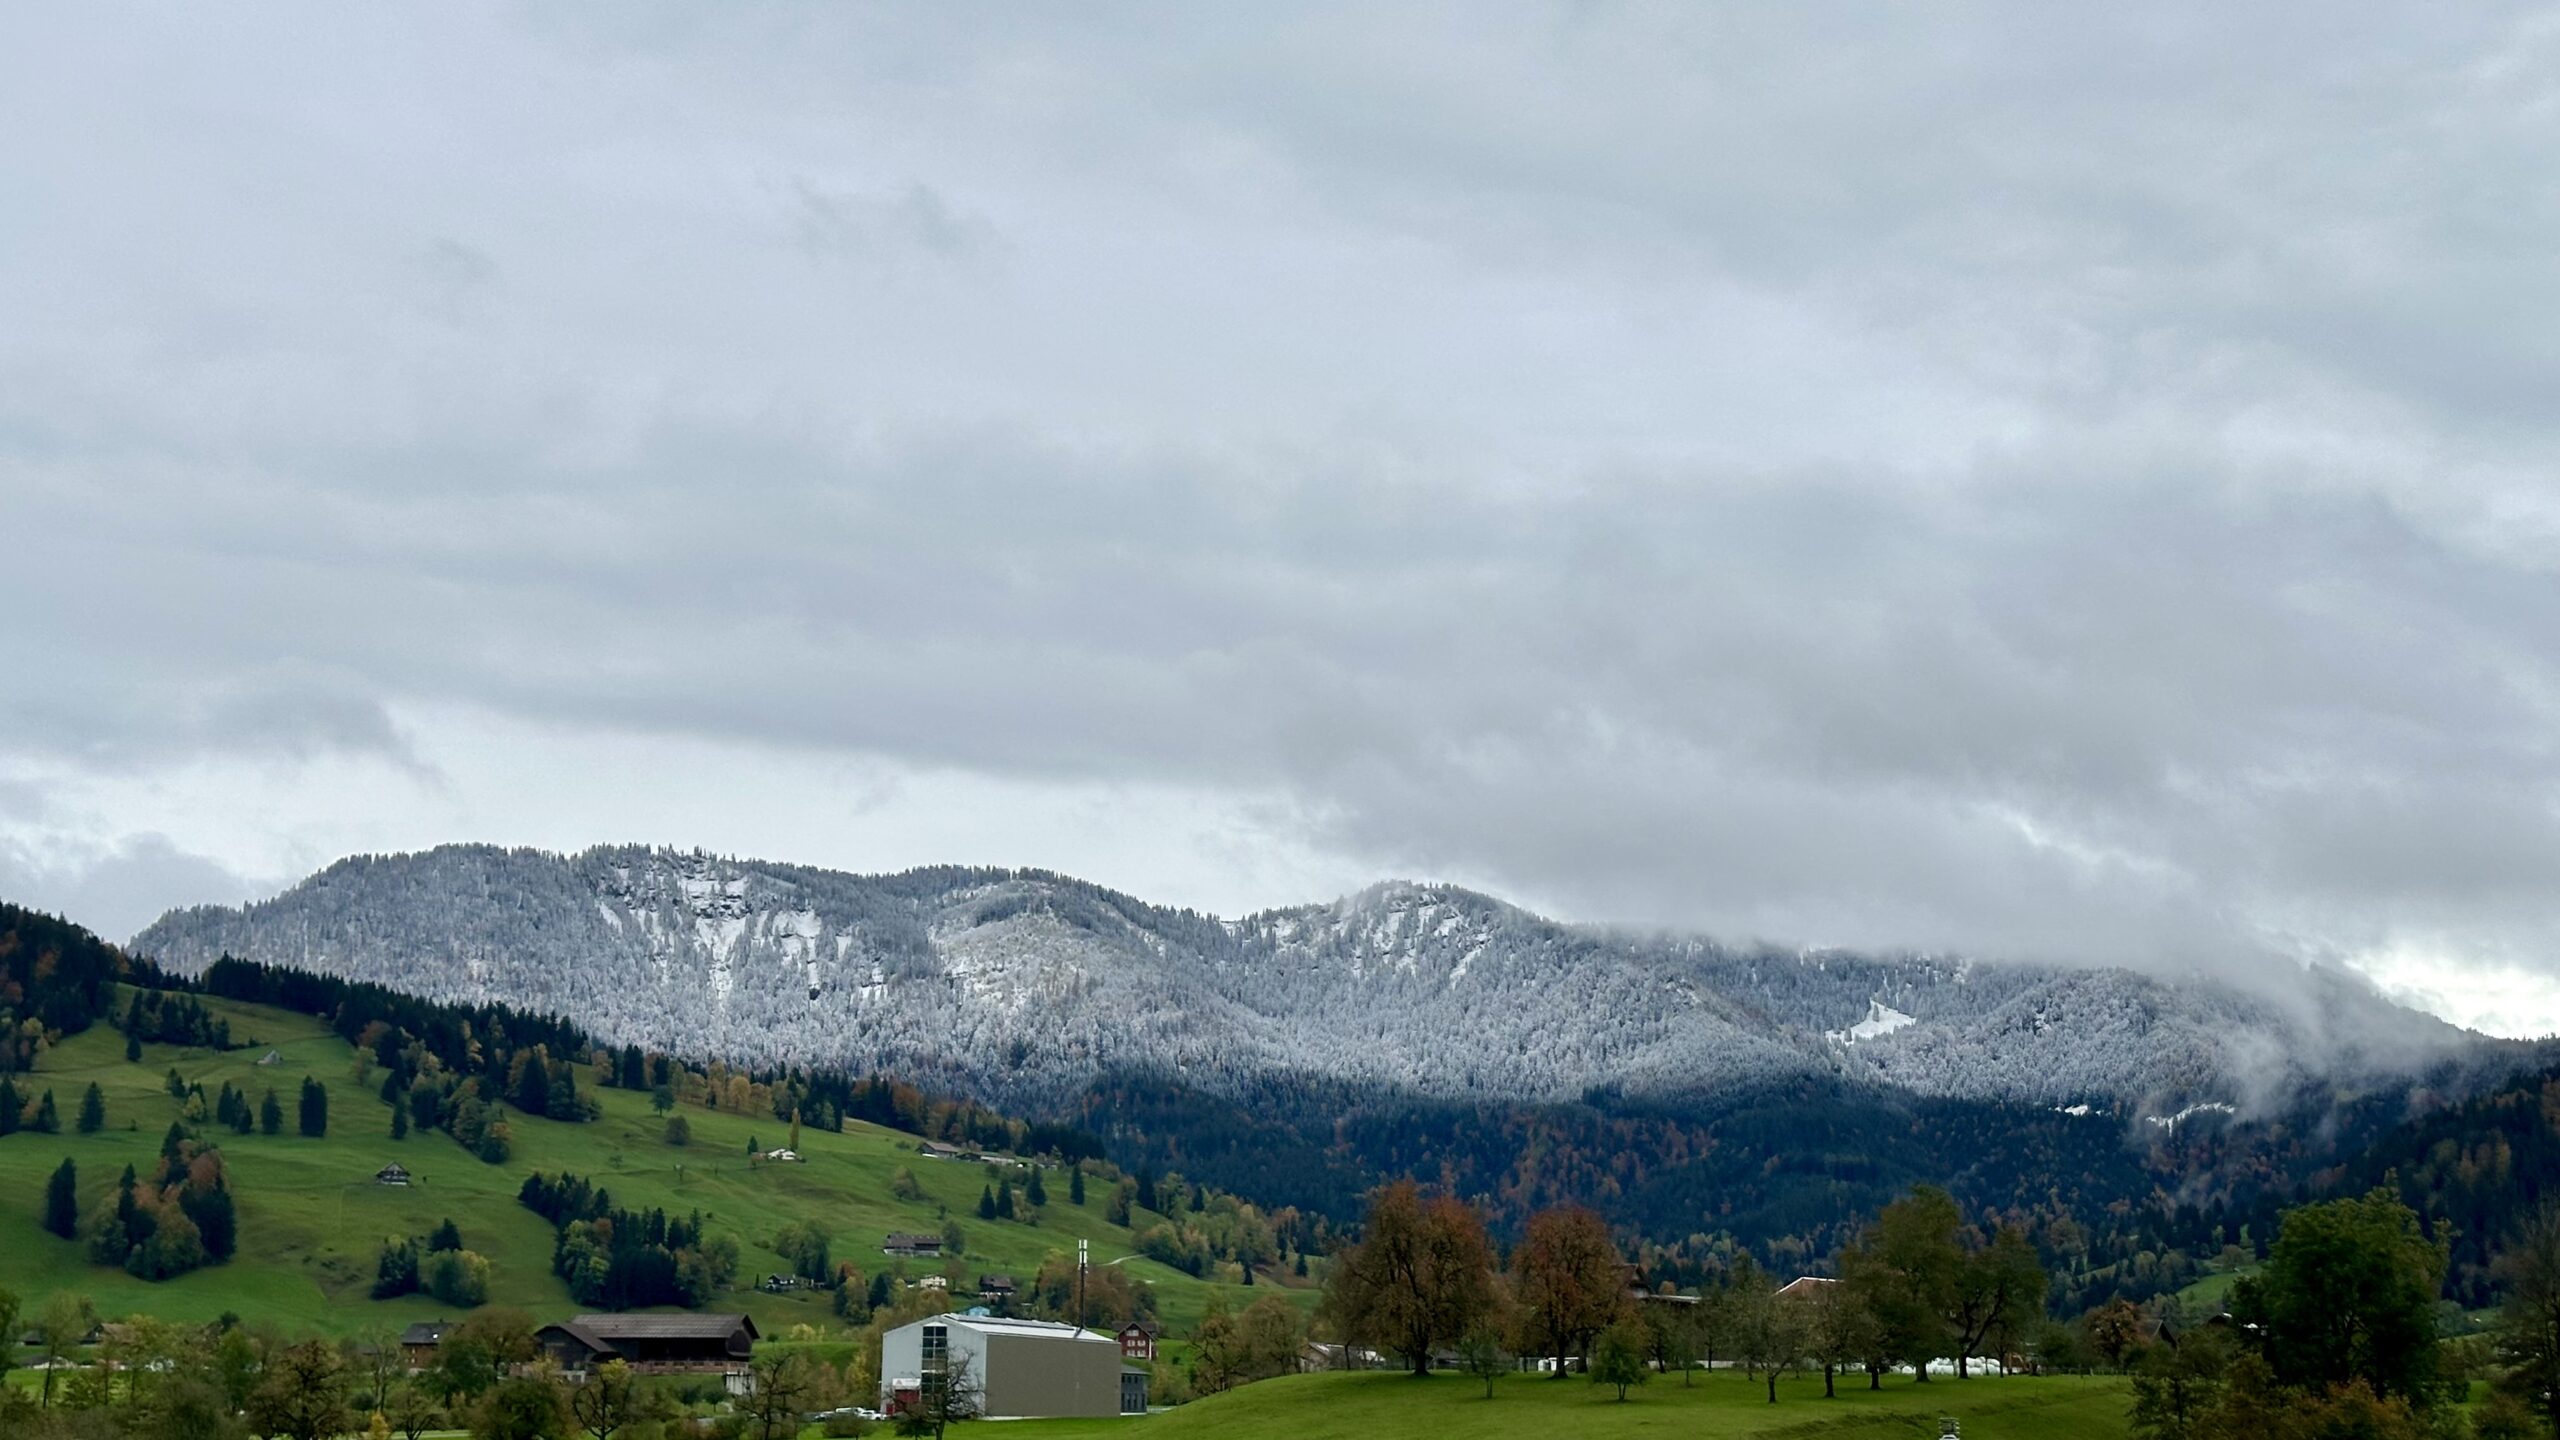 View of a low forested mountains with a clear snow line part way up. Sky is cloudy and gray. Green pastured hills sit in the foreground.